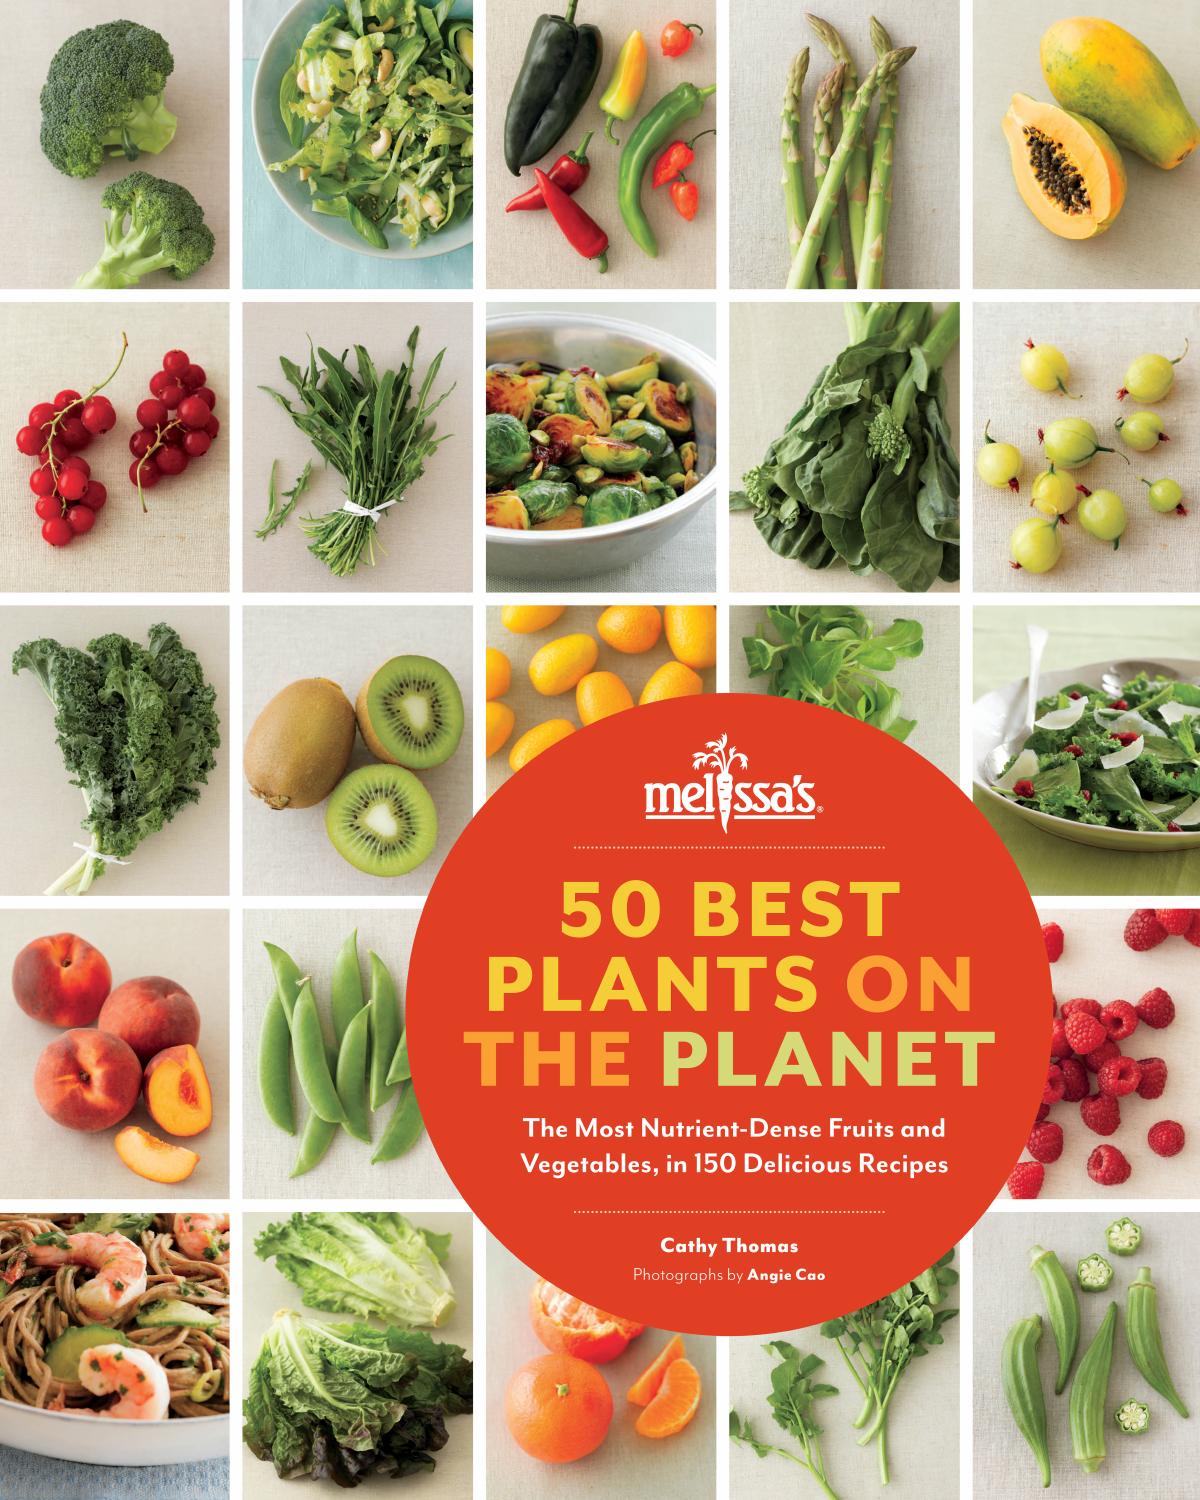 50 Best Plants on the Planet by Cathy Thomas